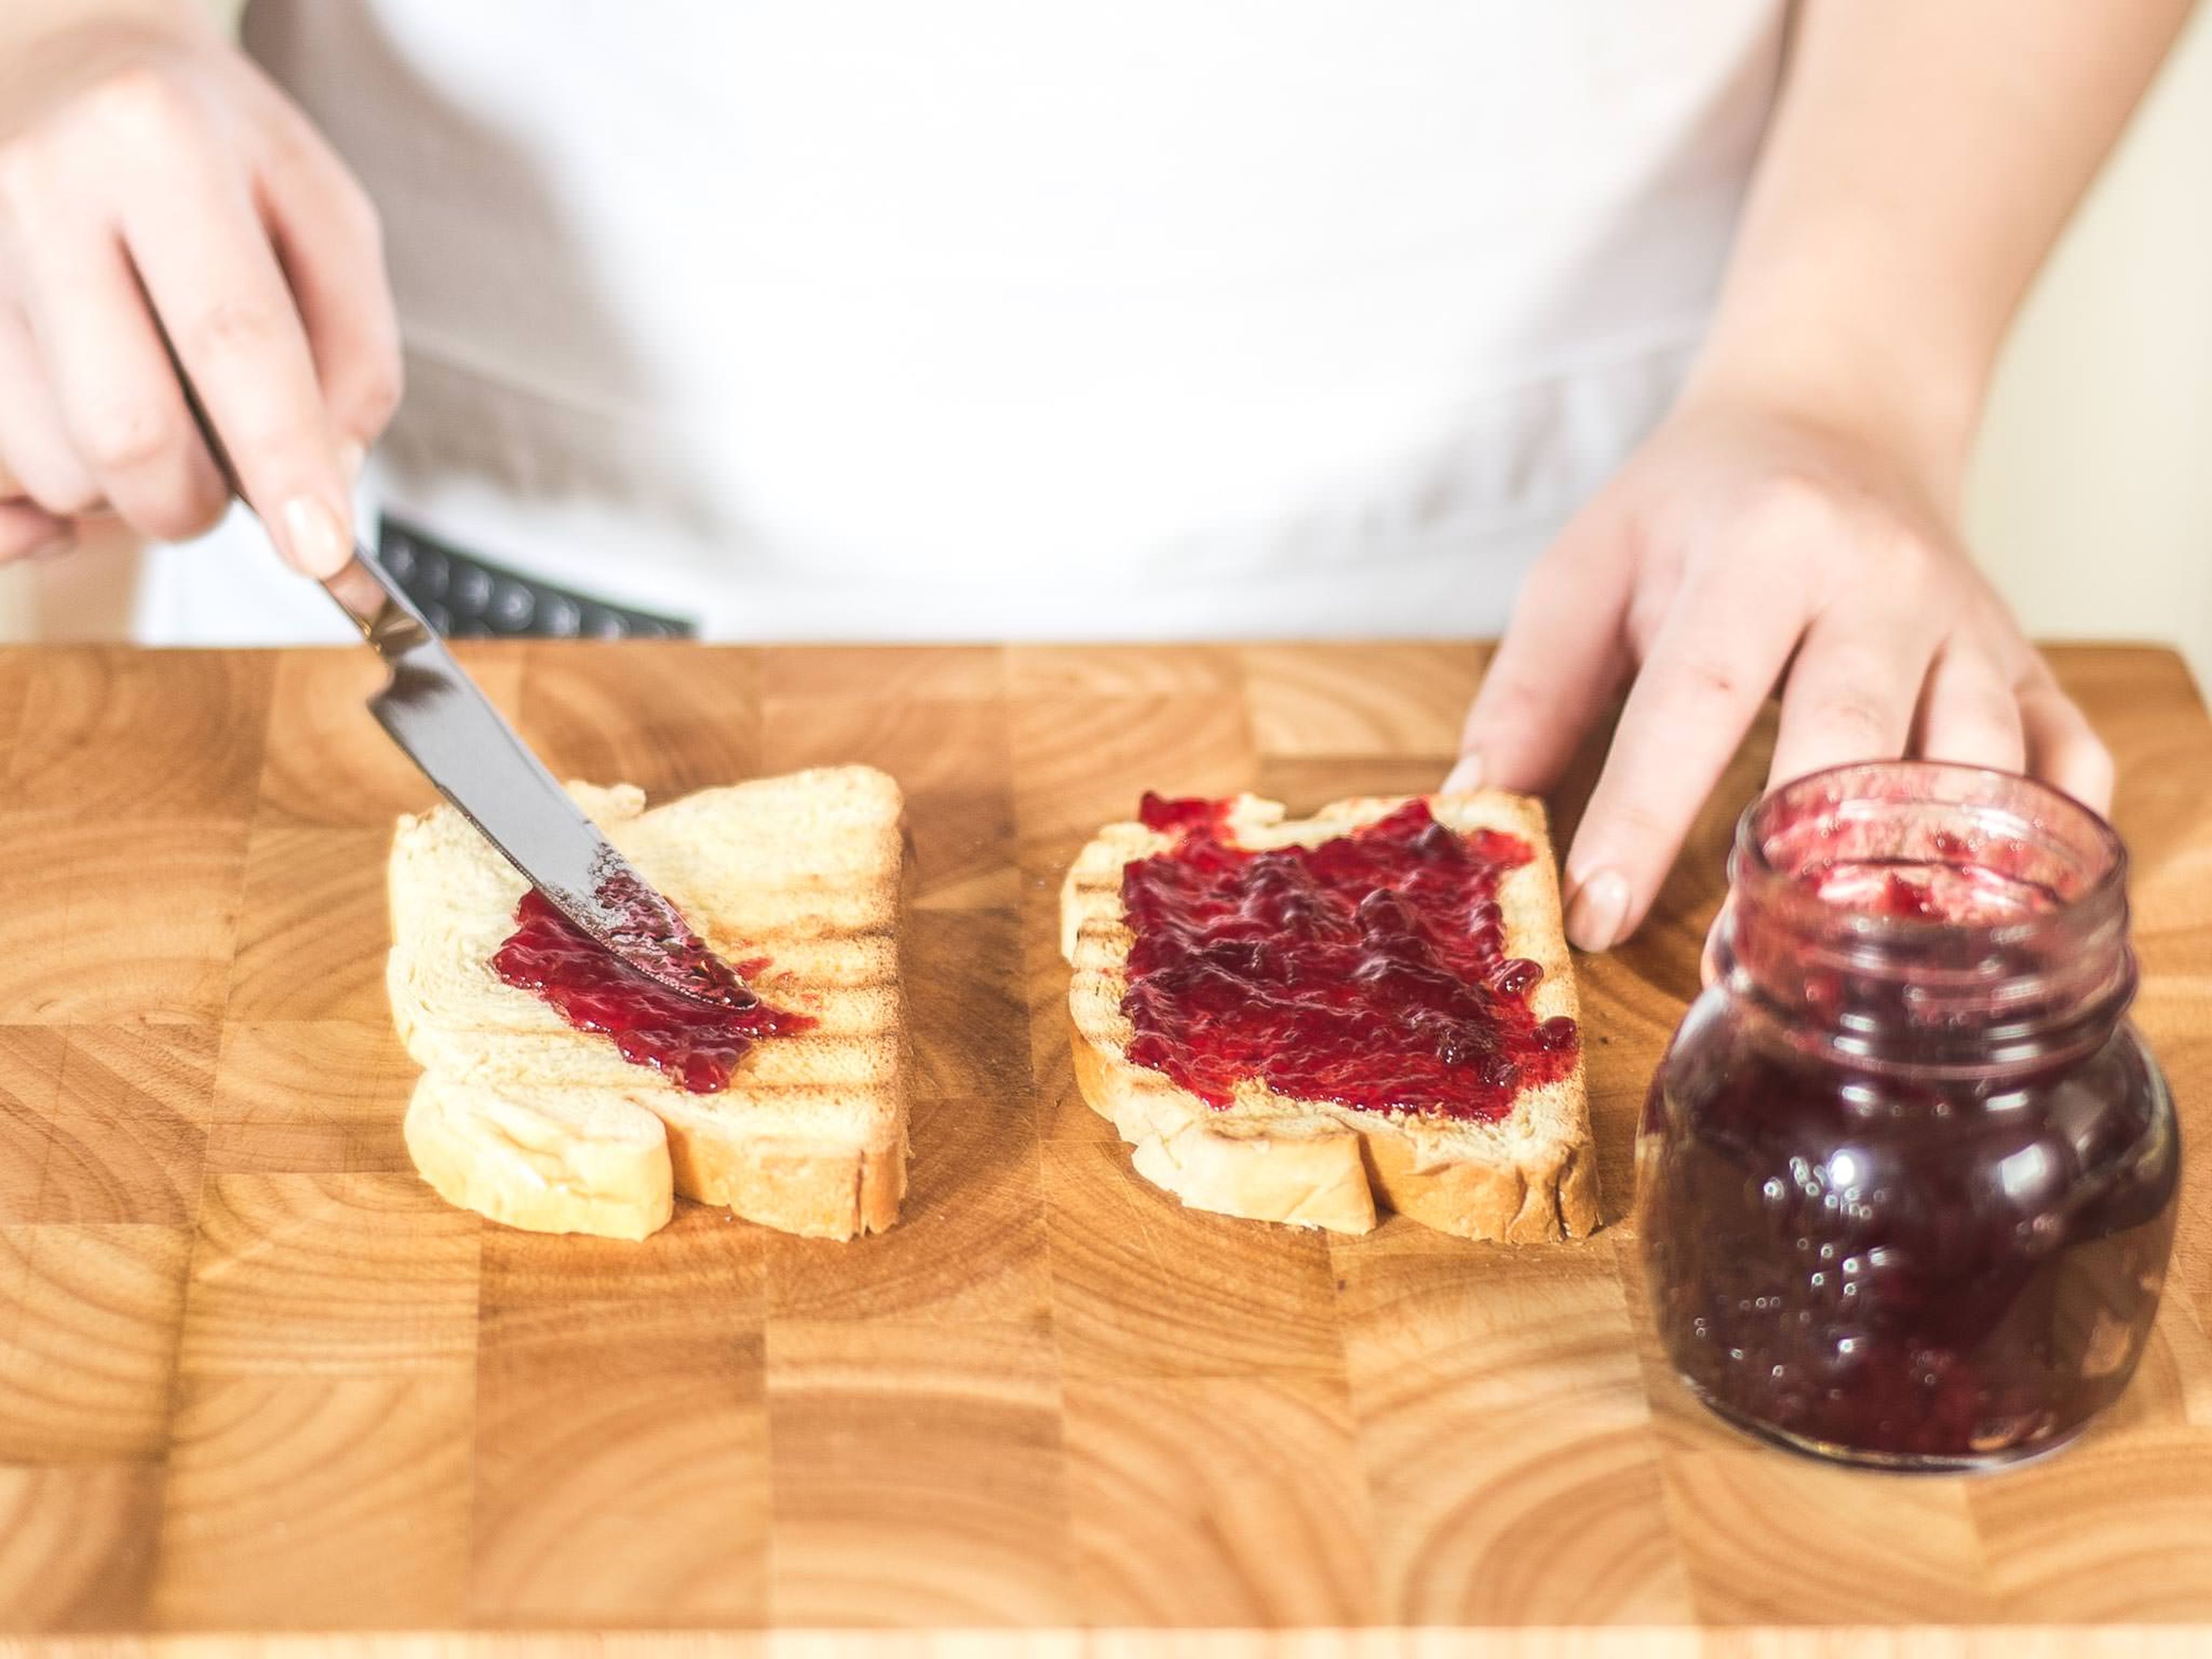 Spread each toasted slice of brioche with a teaspoon of lingonberry jam.